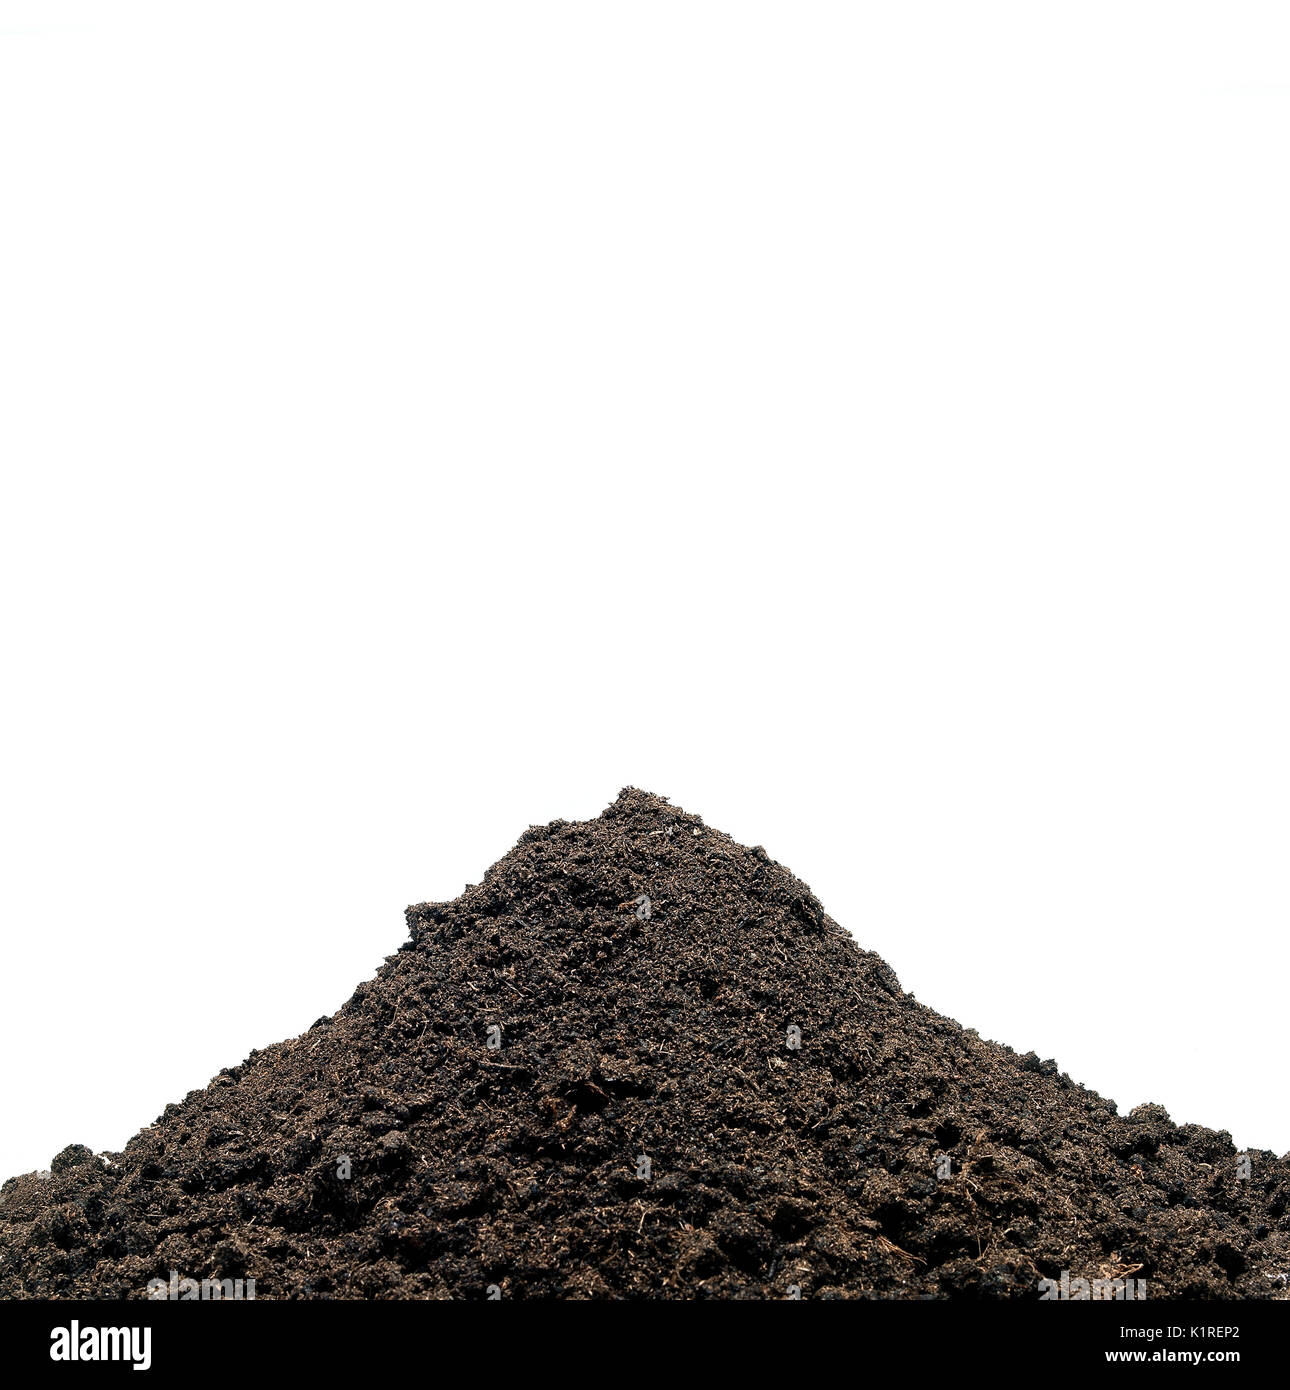 Pile of ground agains white background Stock Photo